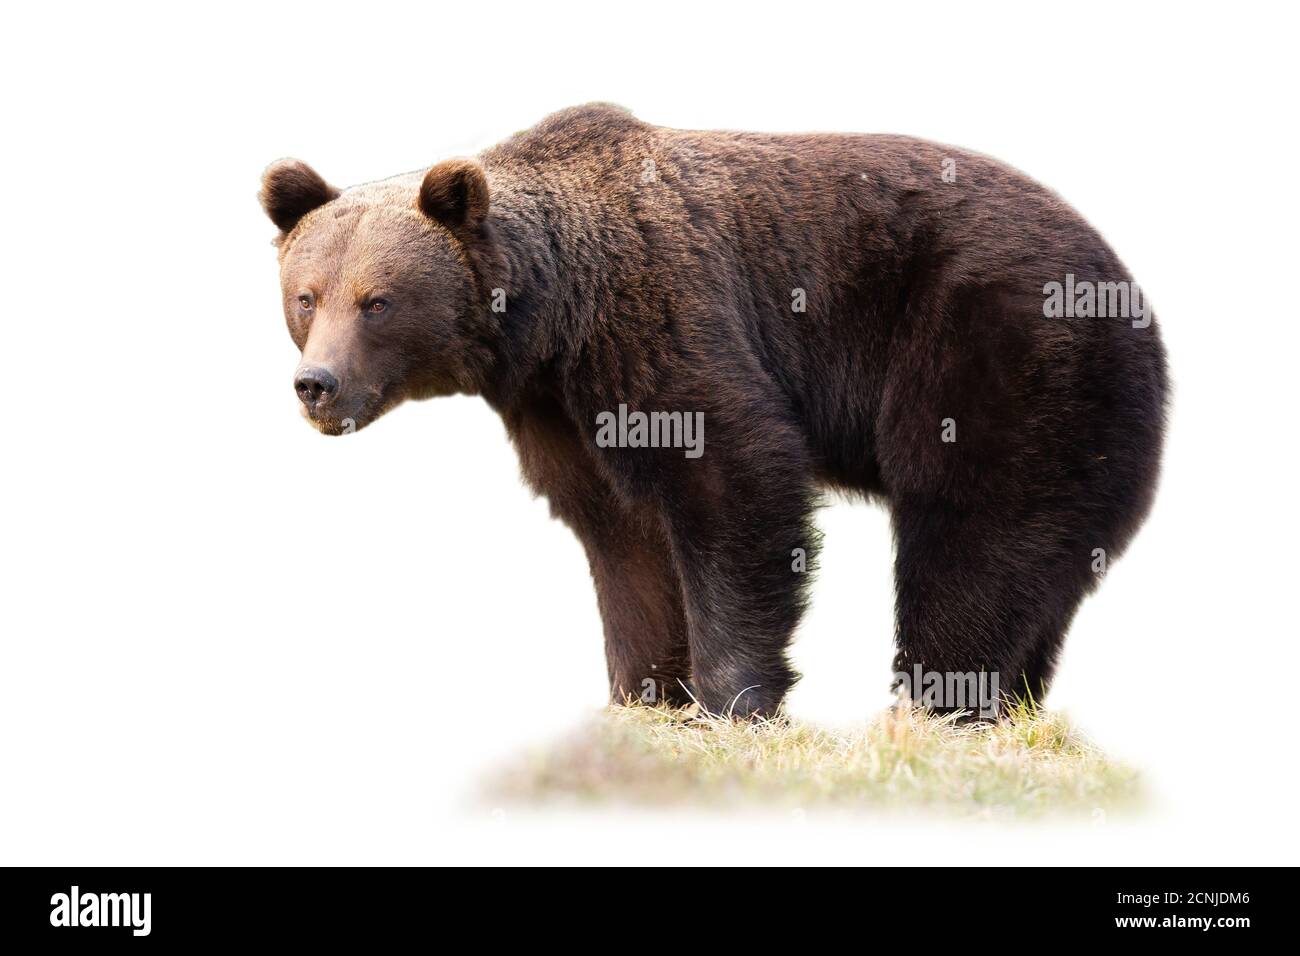 Big brown bear standing on grass isolated on white background. Stock Photo